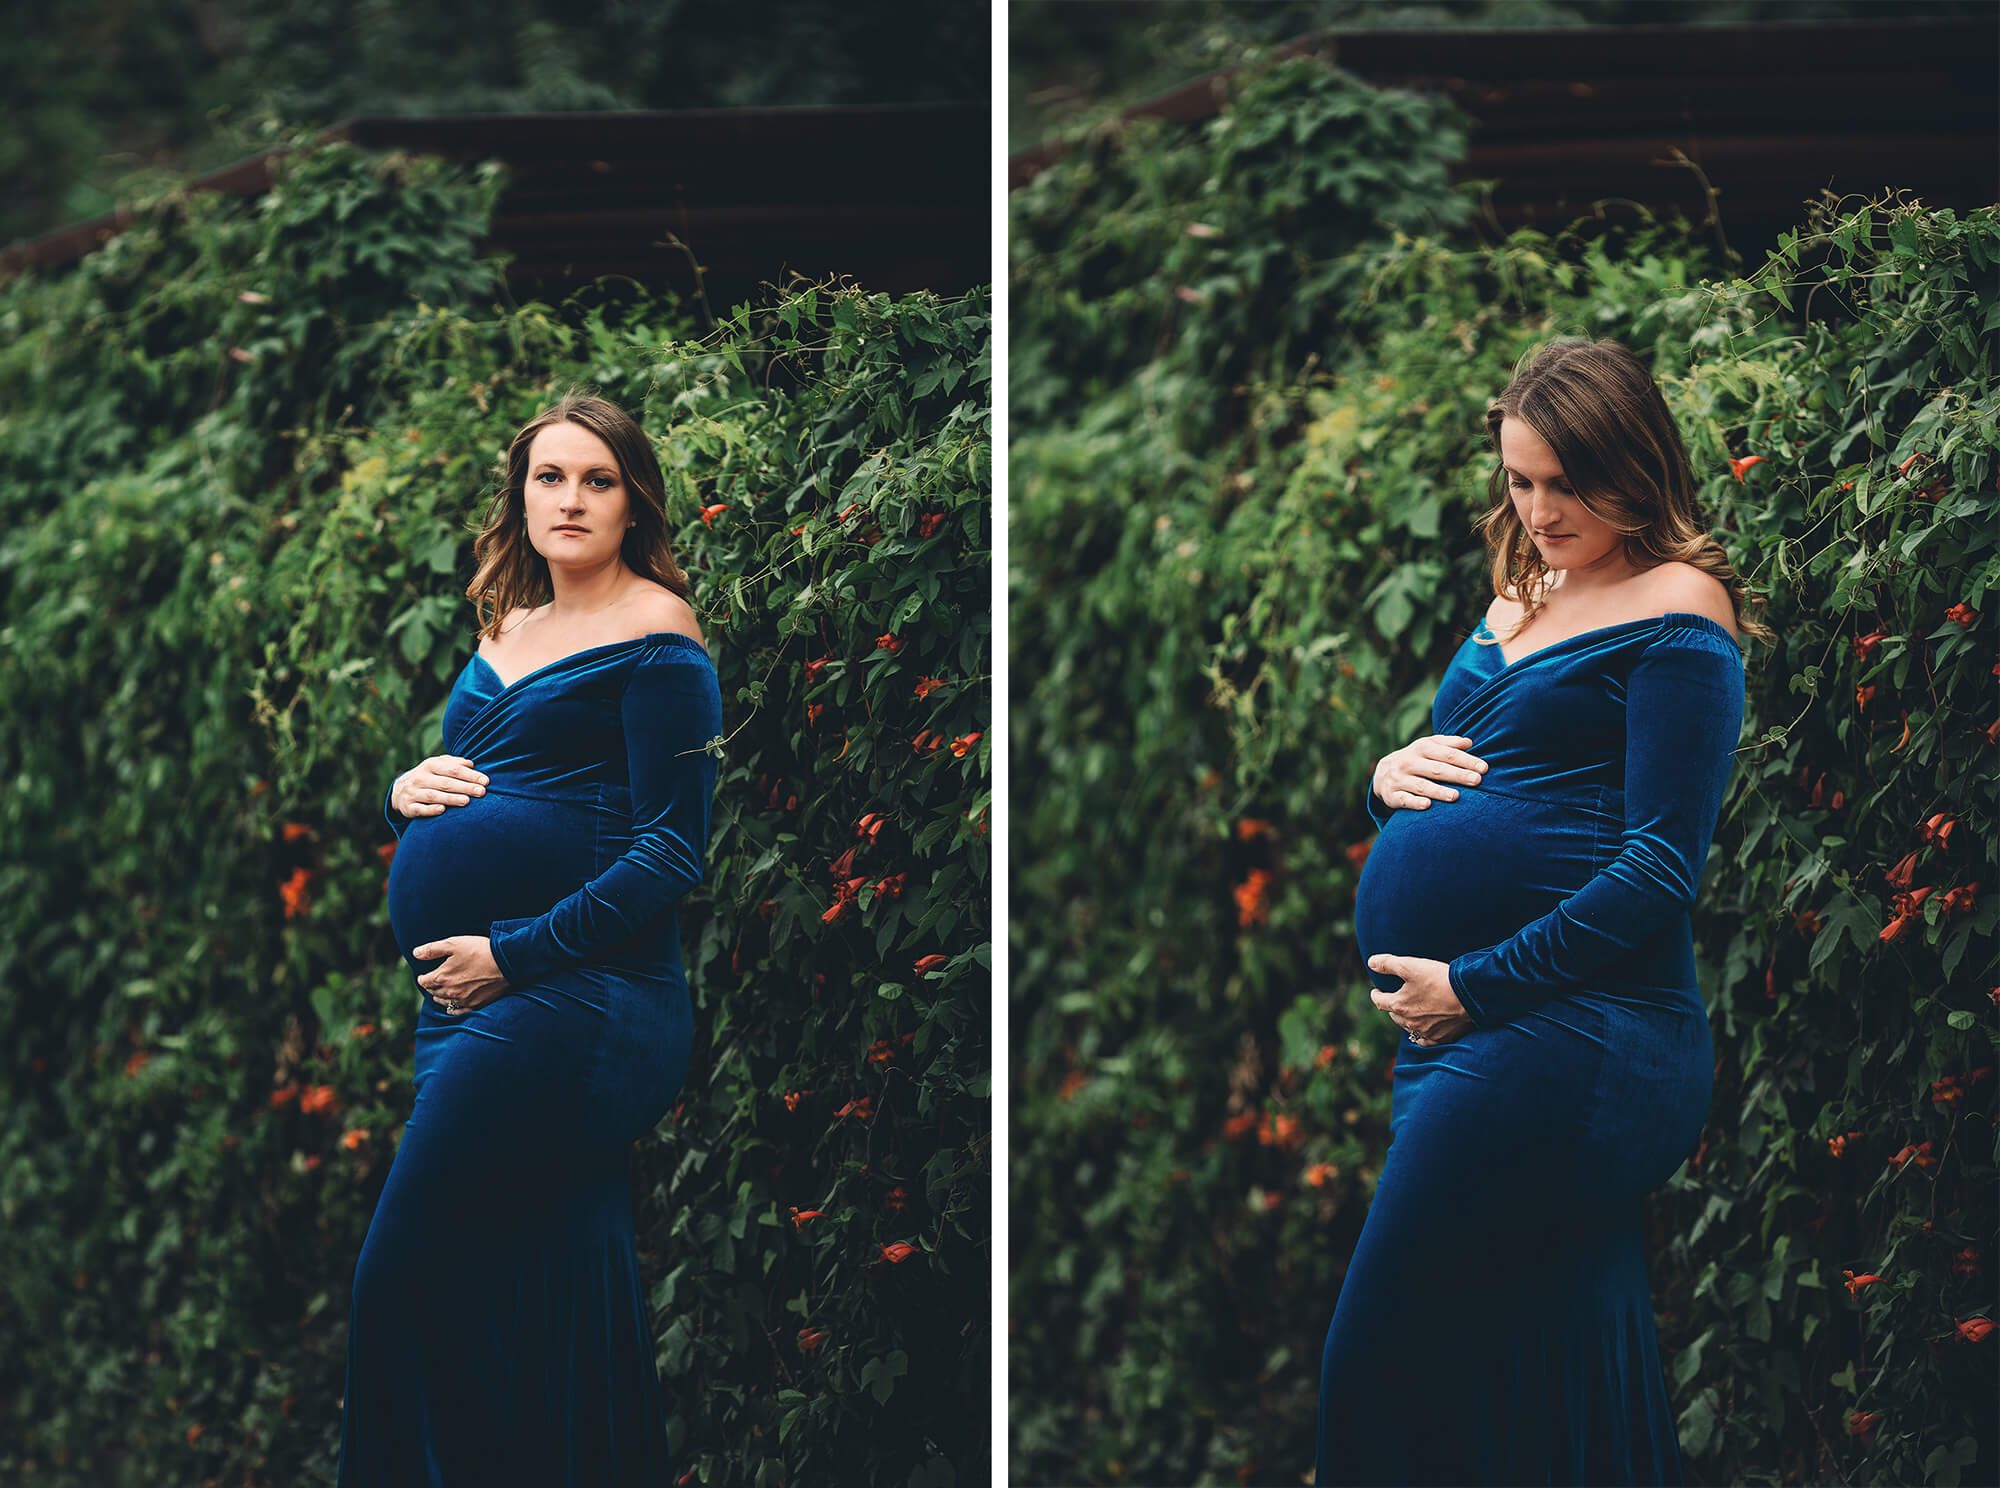 An urban maternity session near a vine covered fence